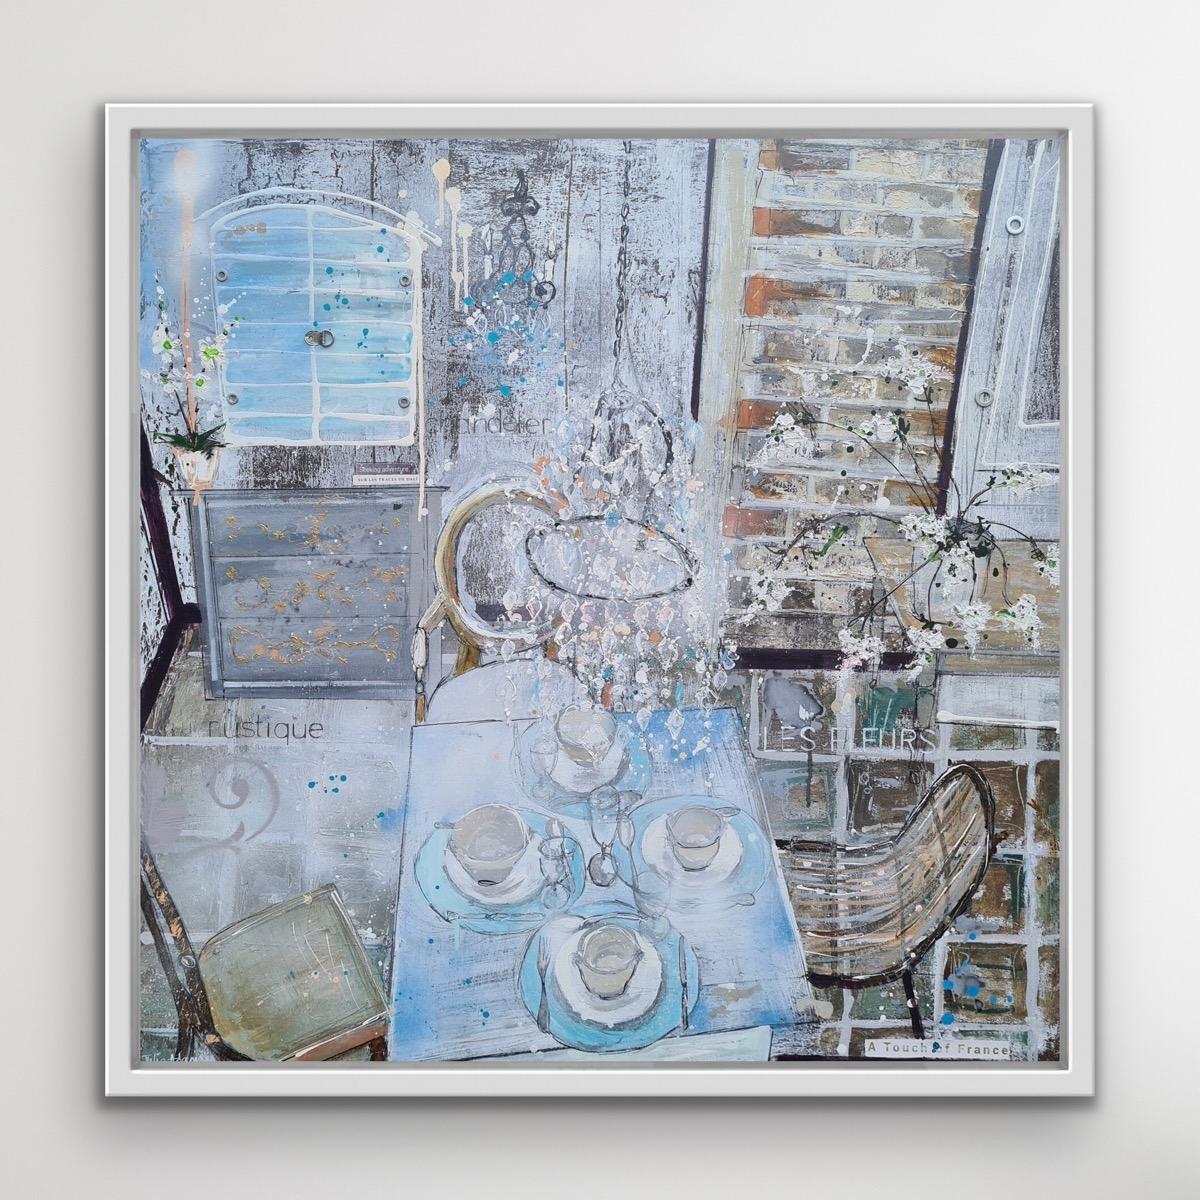 A Touch of France by Julia Adams is a blue and silver mixed media interior space painting.
Discover original artworks by Julia Adams available to buy online and in our art gallery at Wychwood Art in Deddington. Julia Adams comments: 